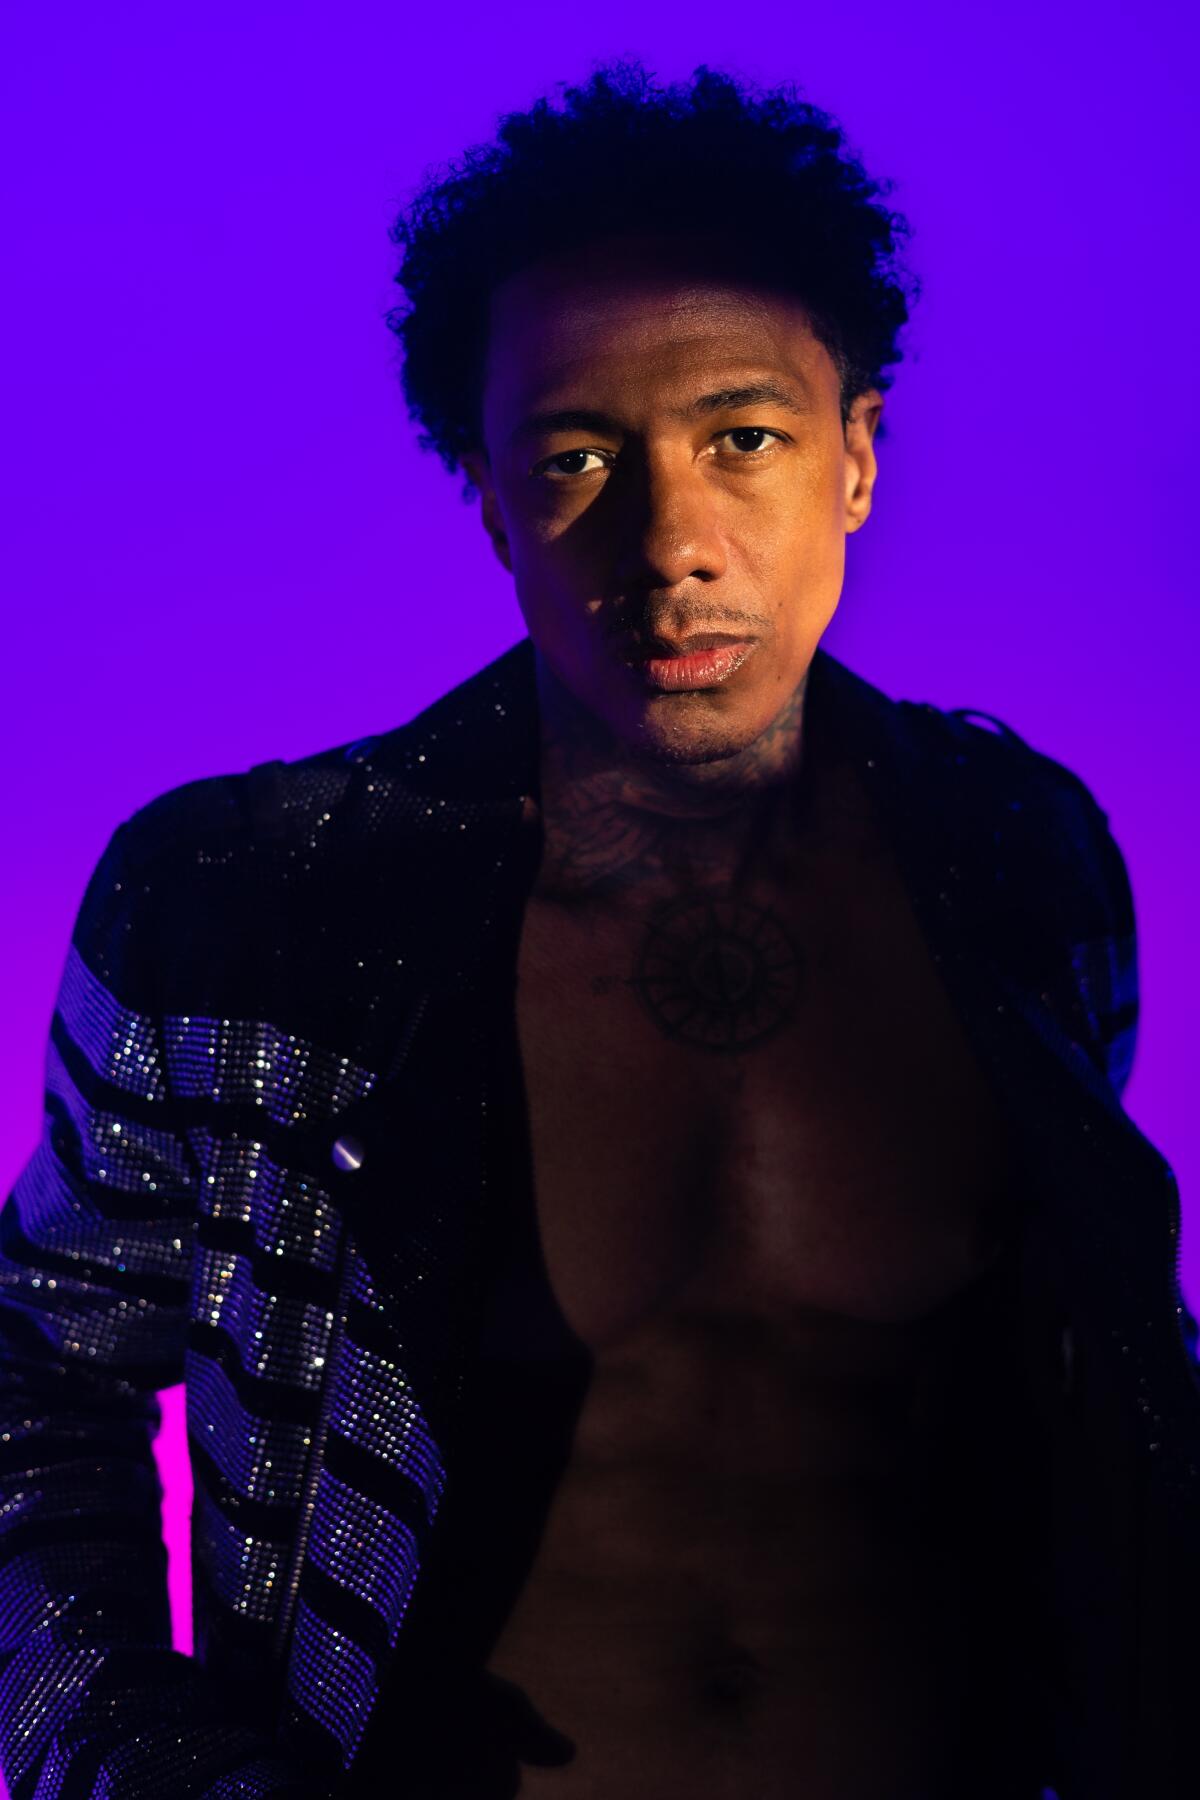 Nick Cannon poses for a portrait in a sparkly suit amid purple lighting